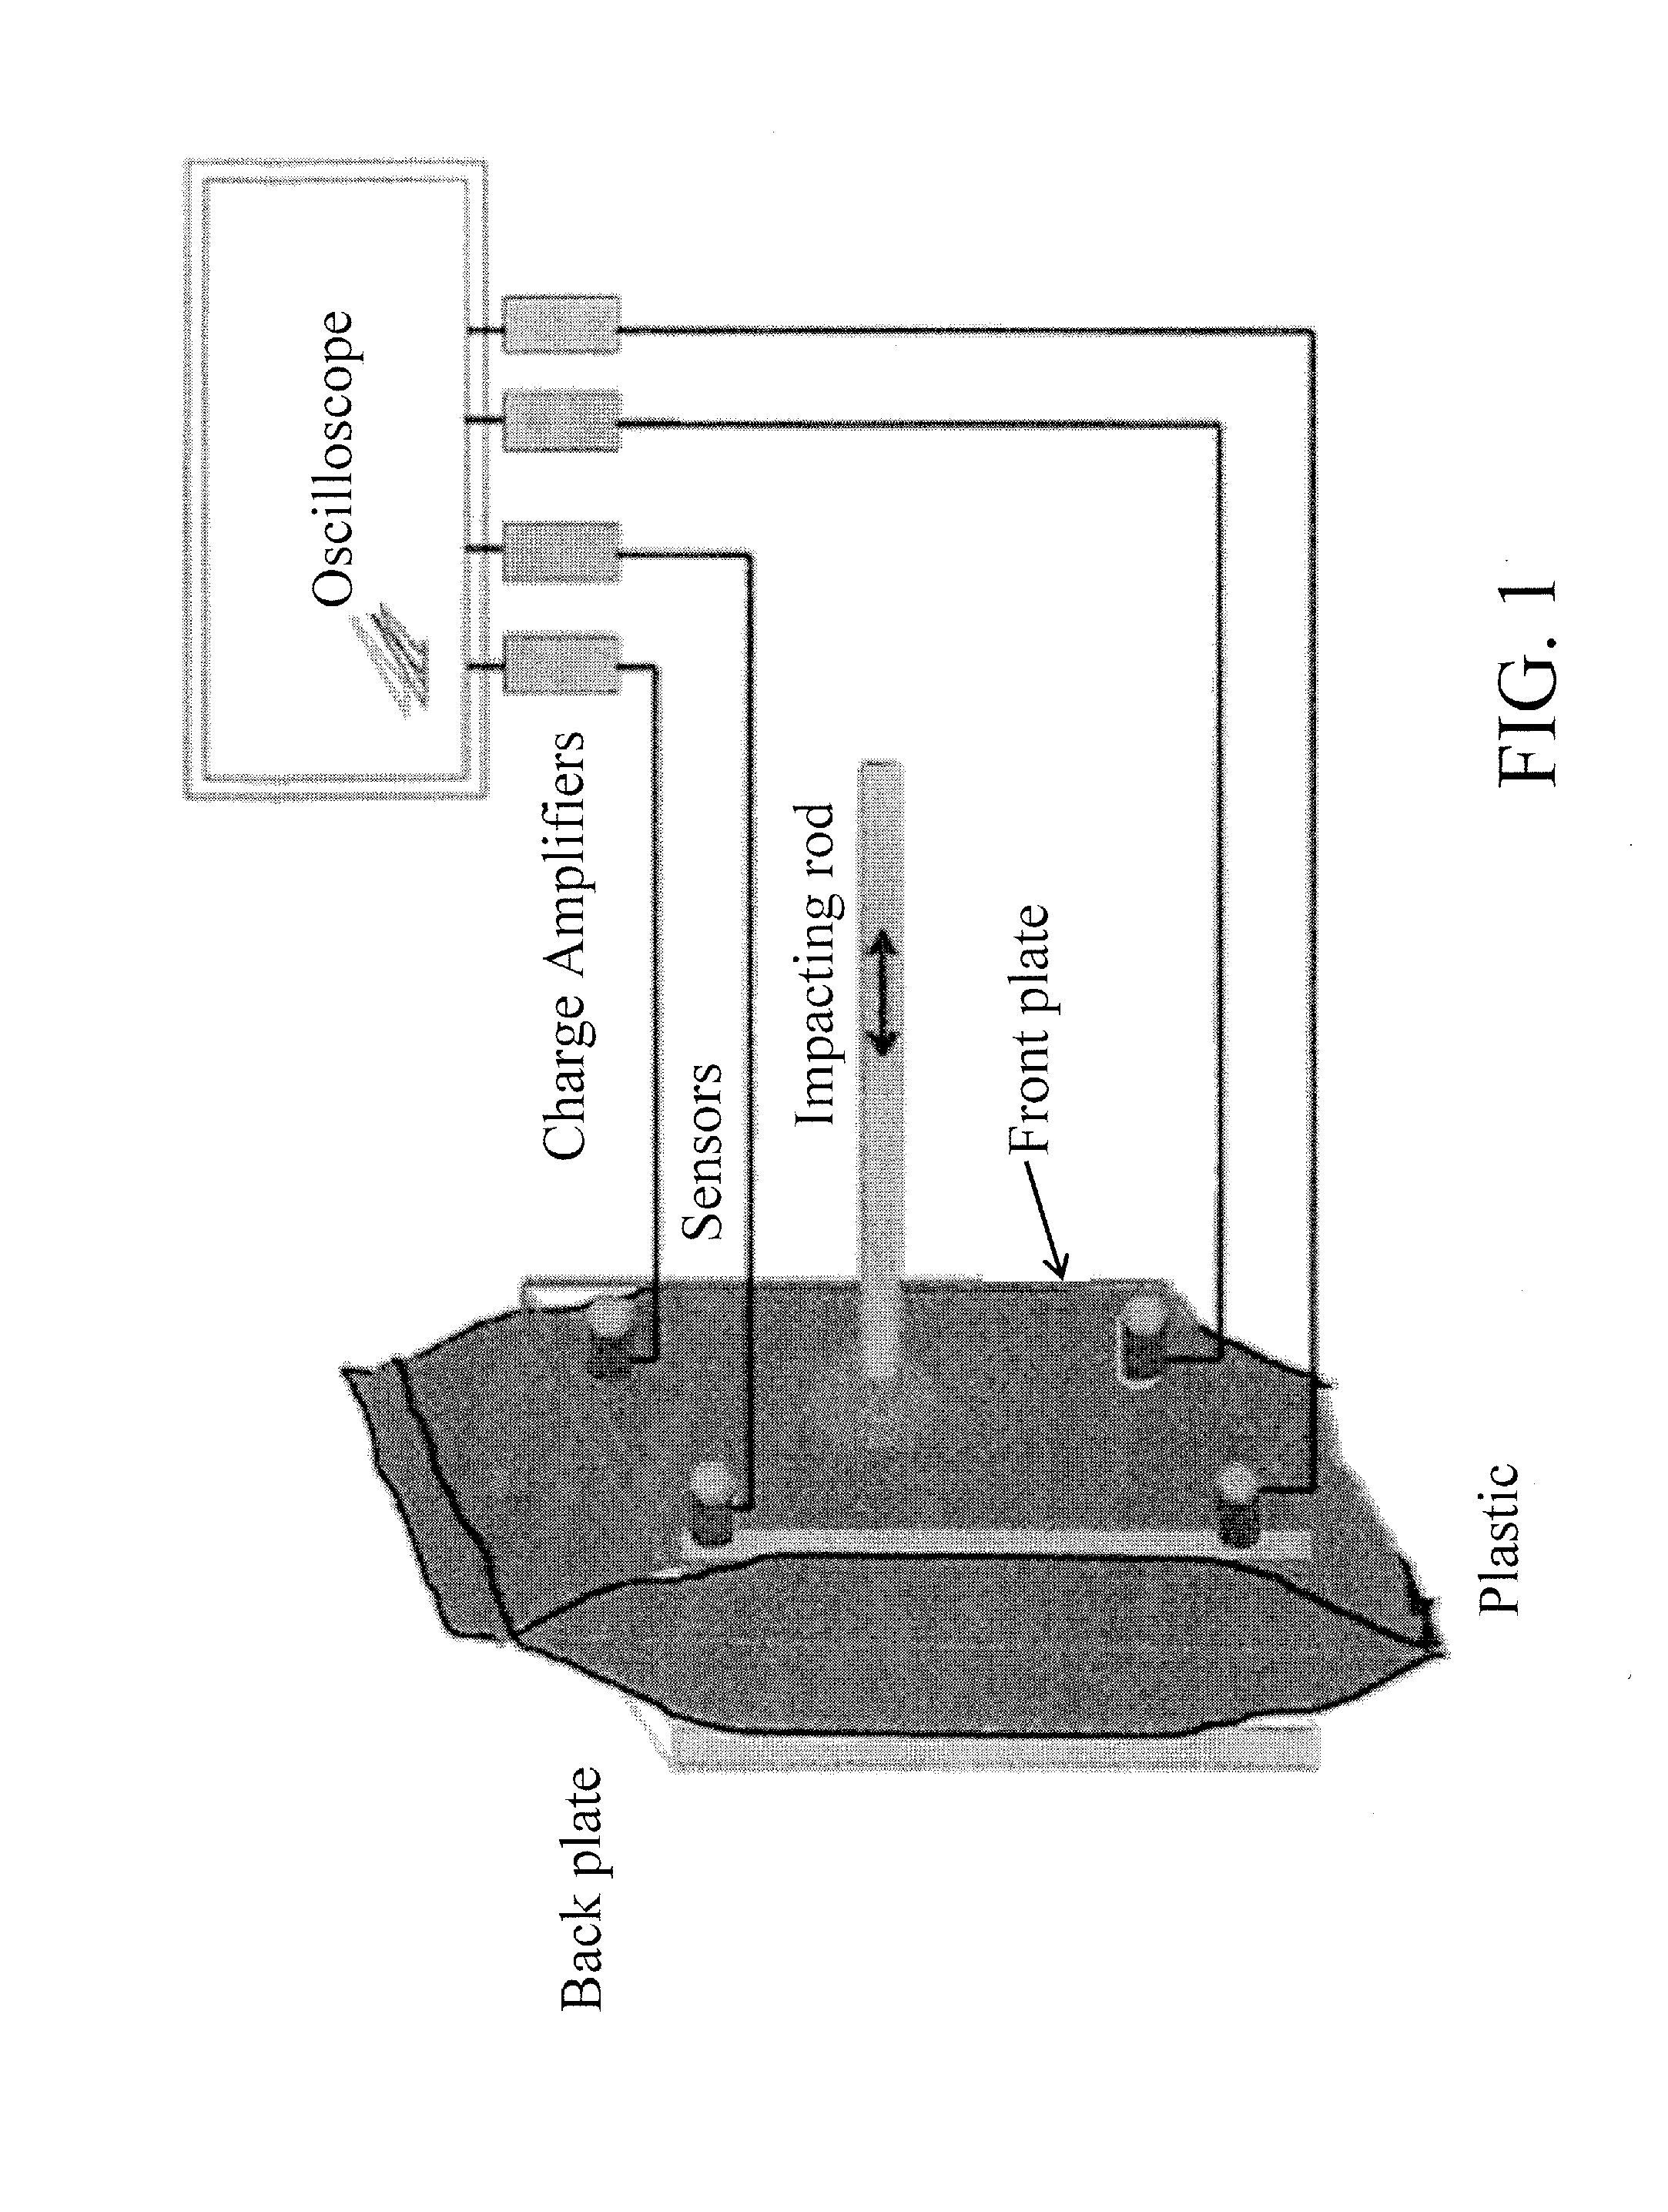 Method and apparatus for testing quality of seal and package integrity